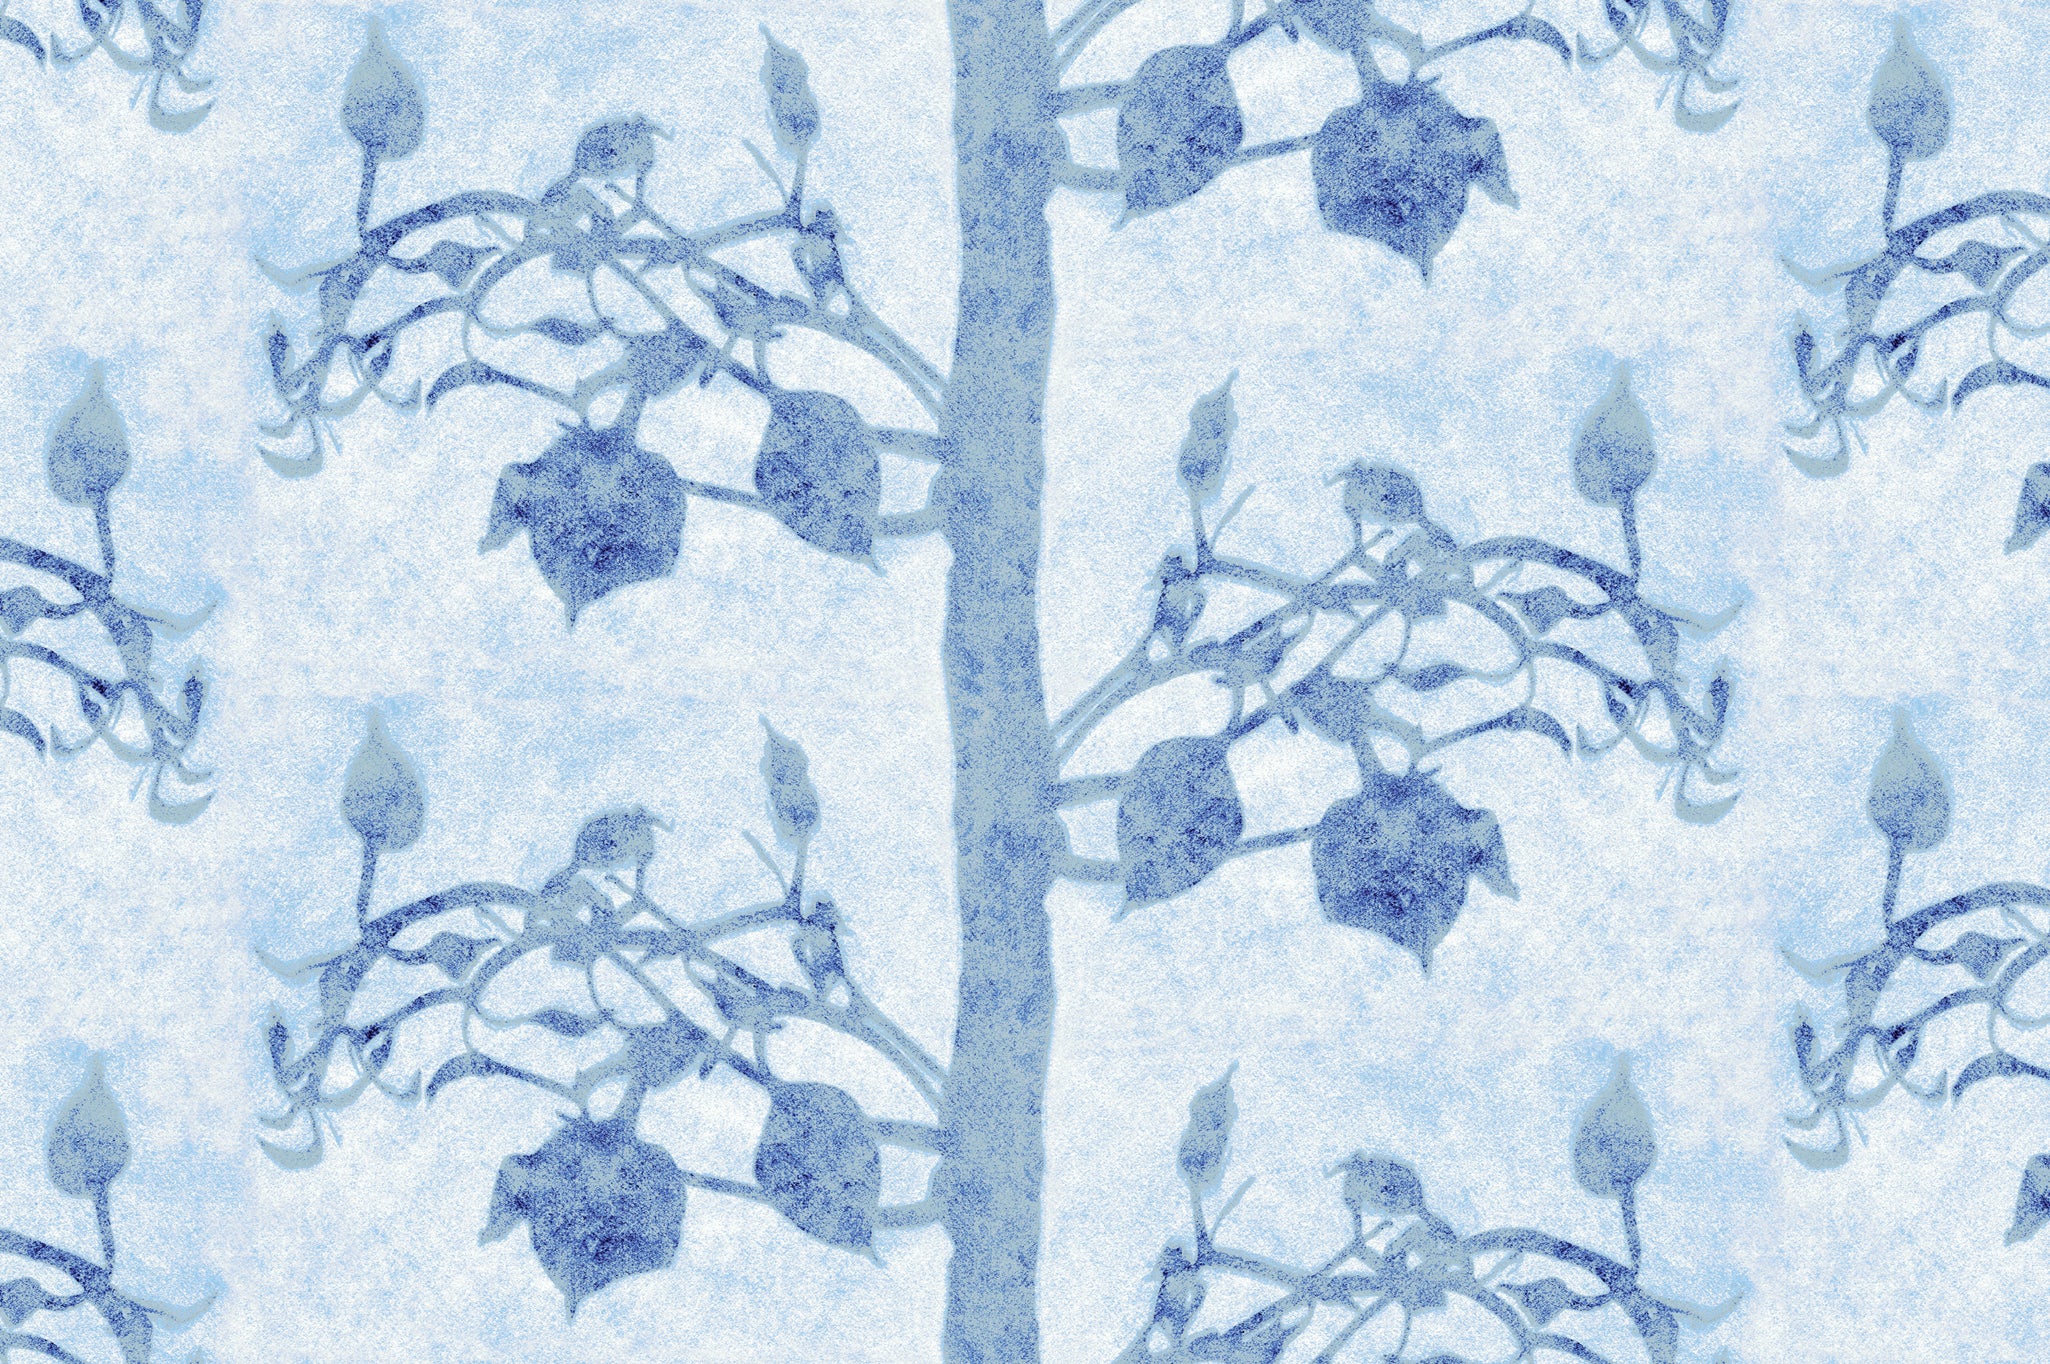 Detail of wallpaper in a linear tree and leaf print in navy on a light blue field.